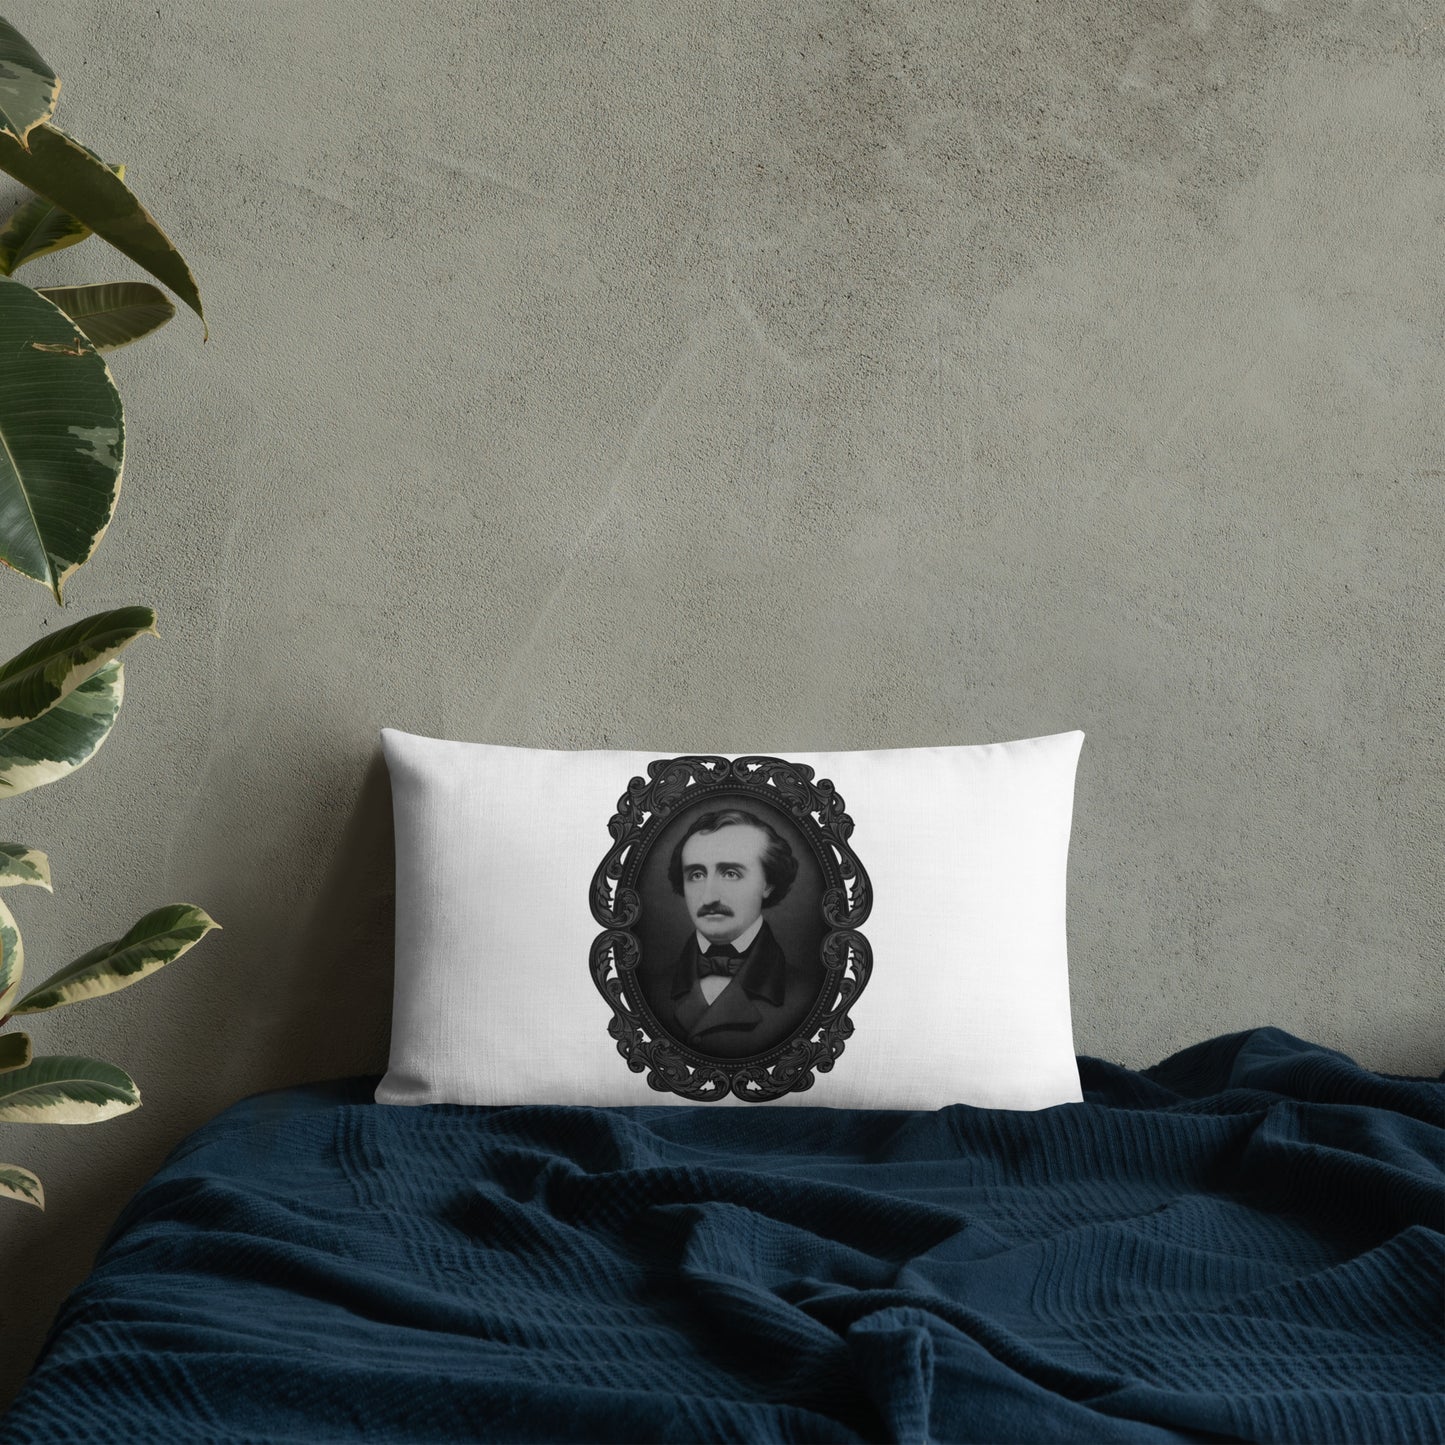 Edgar Allan Poe portrait premium pillow - add a touch of literary charm to your home decor. 20x12